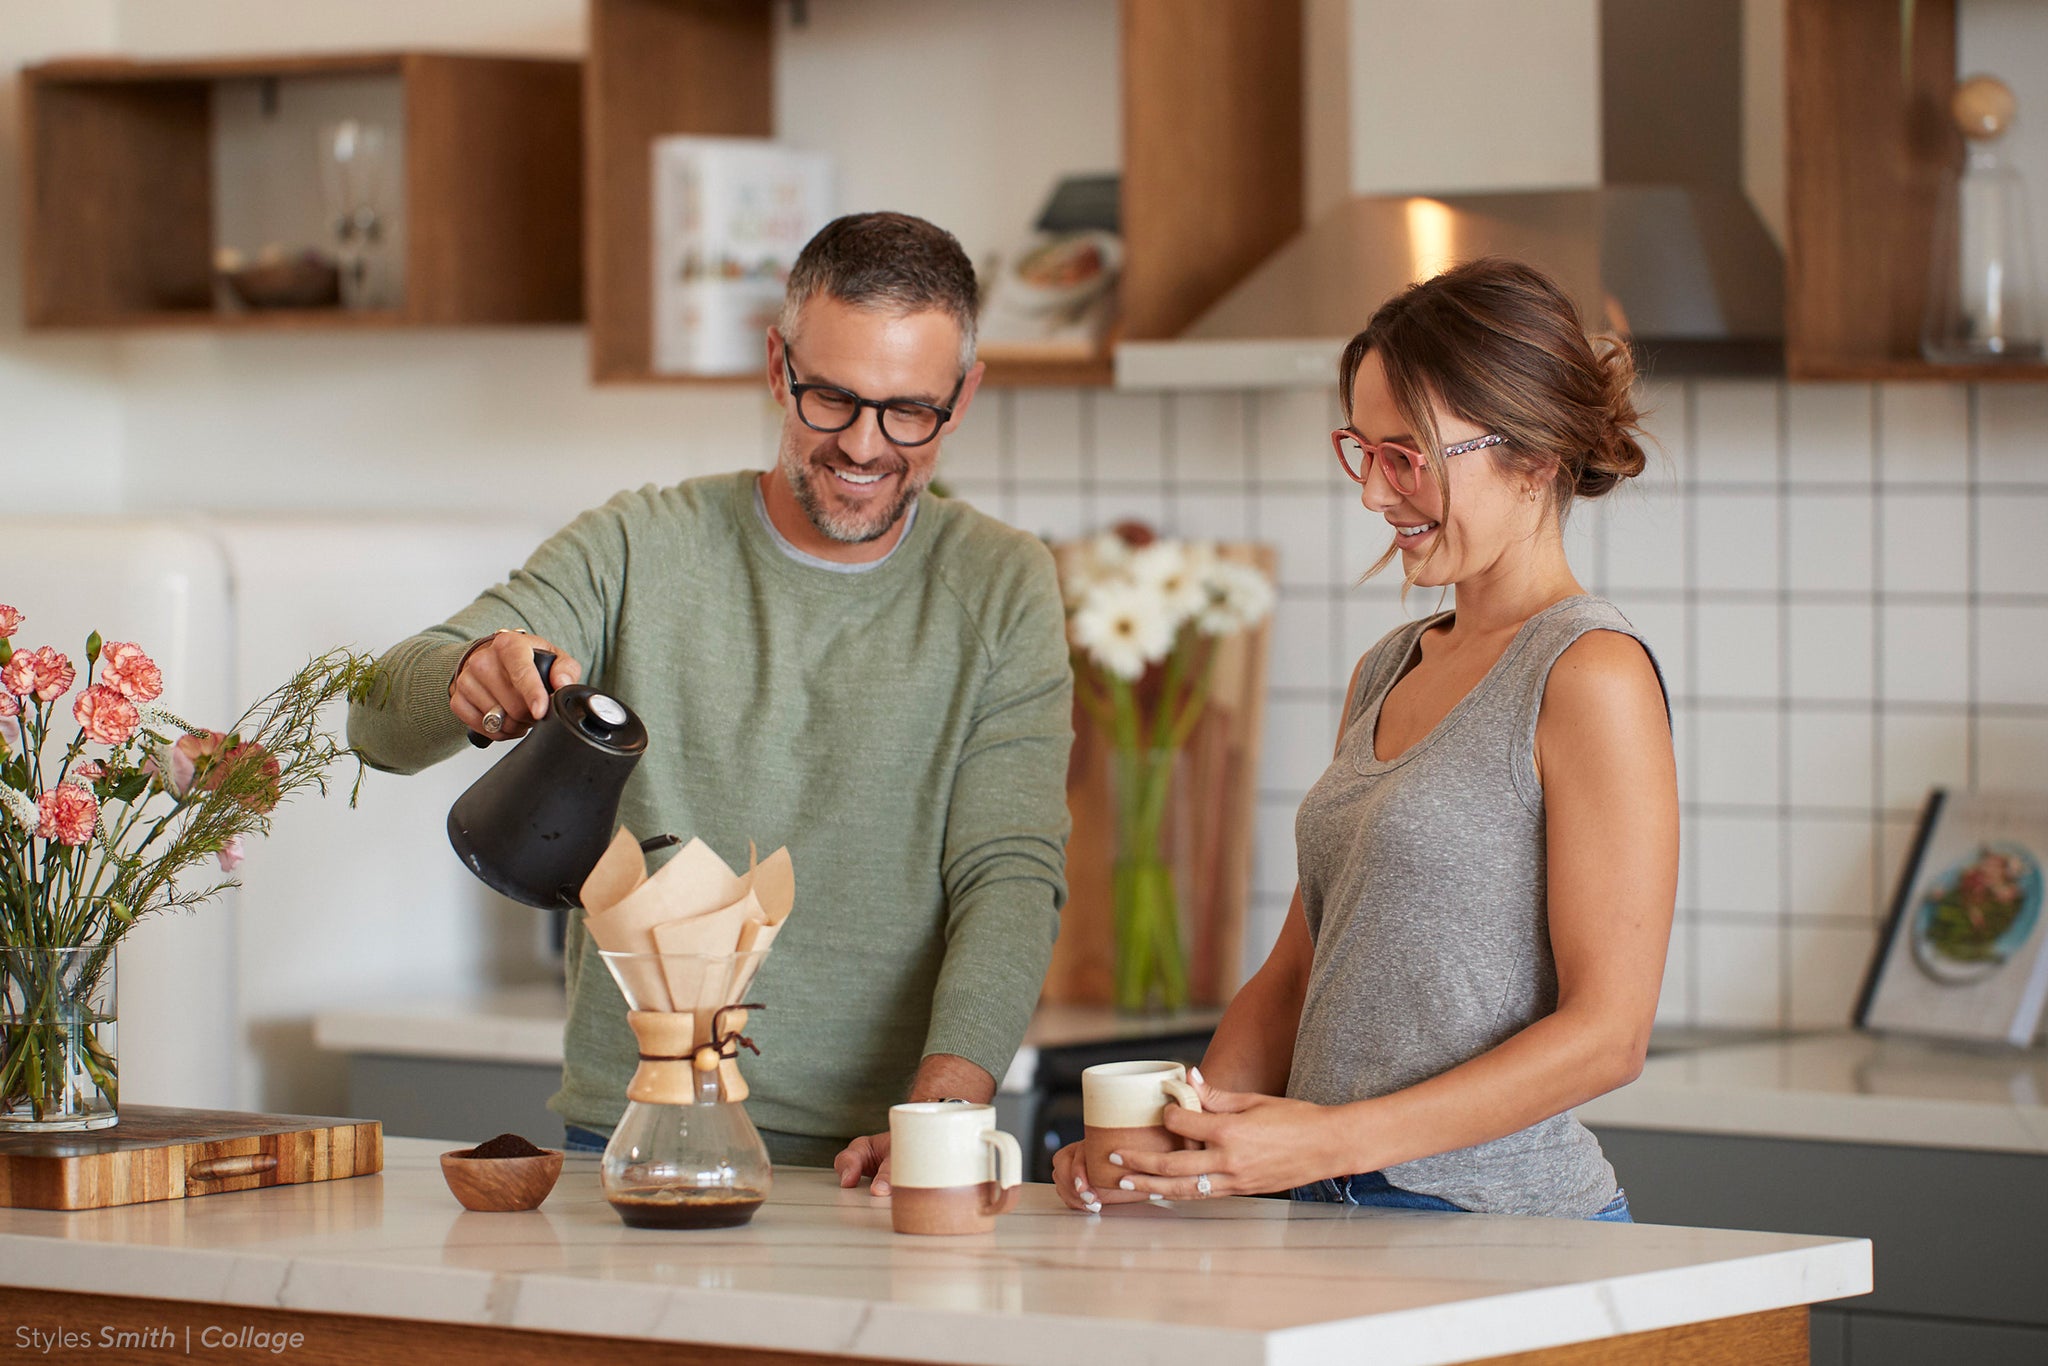 Man and woman brewing coffee in the kitchen wearing Peepers blue light glasses